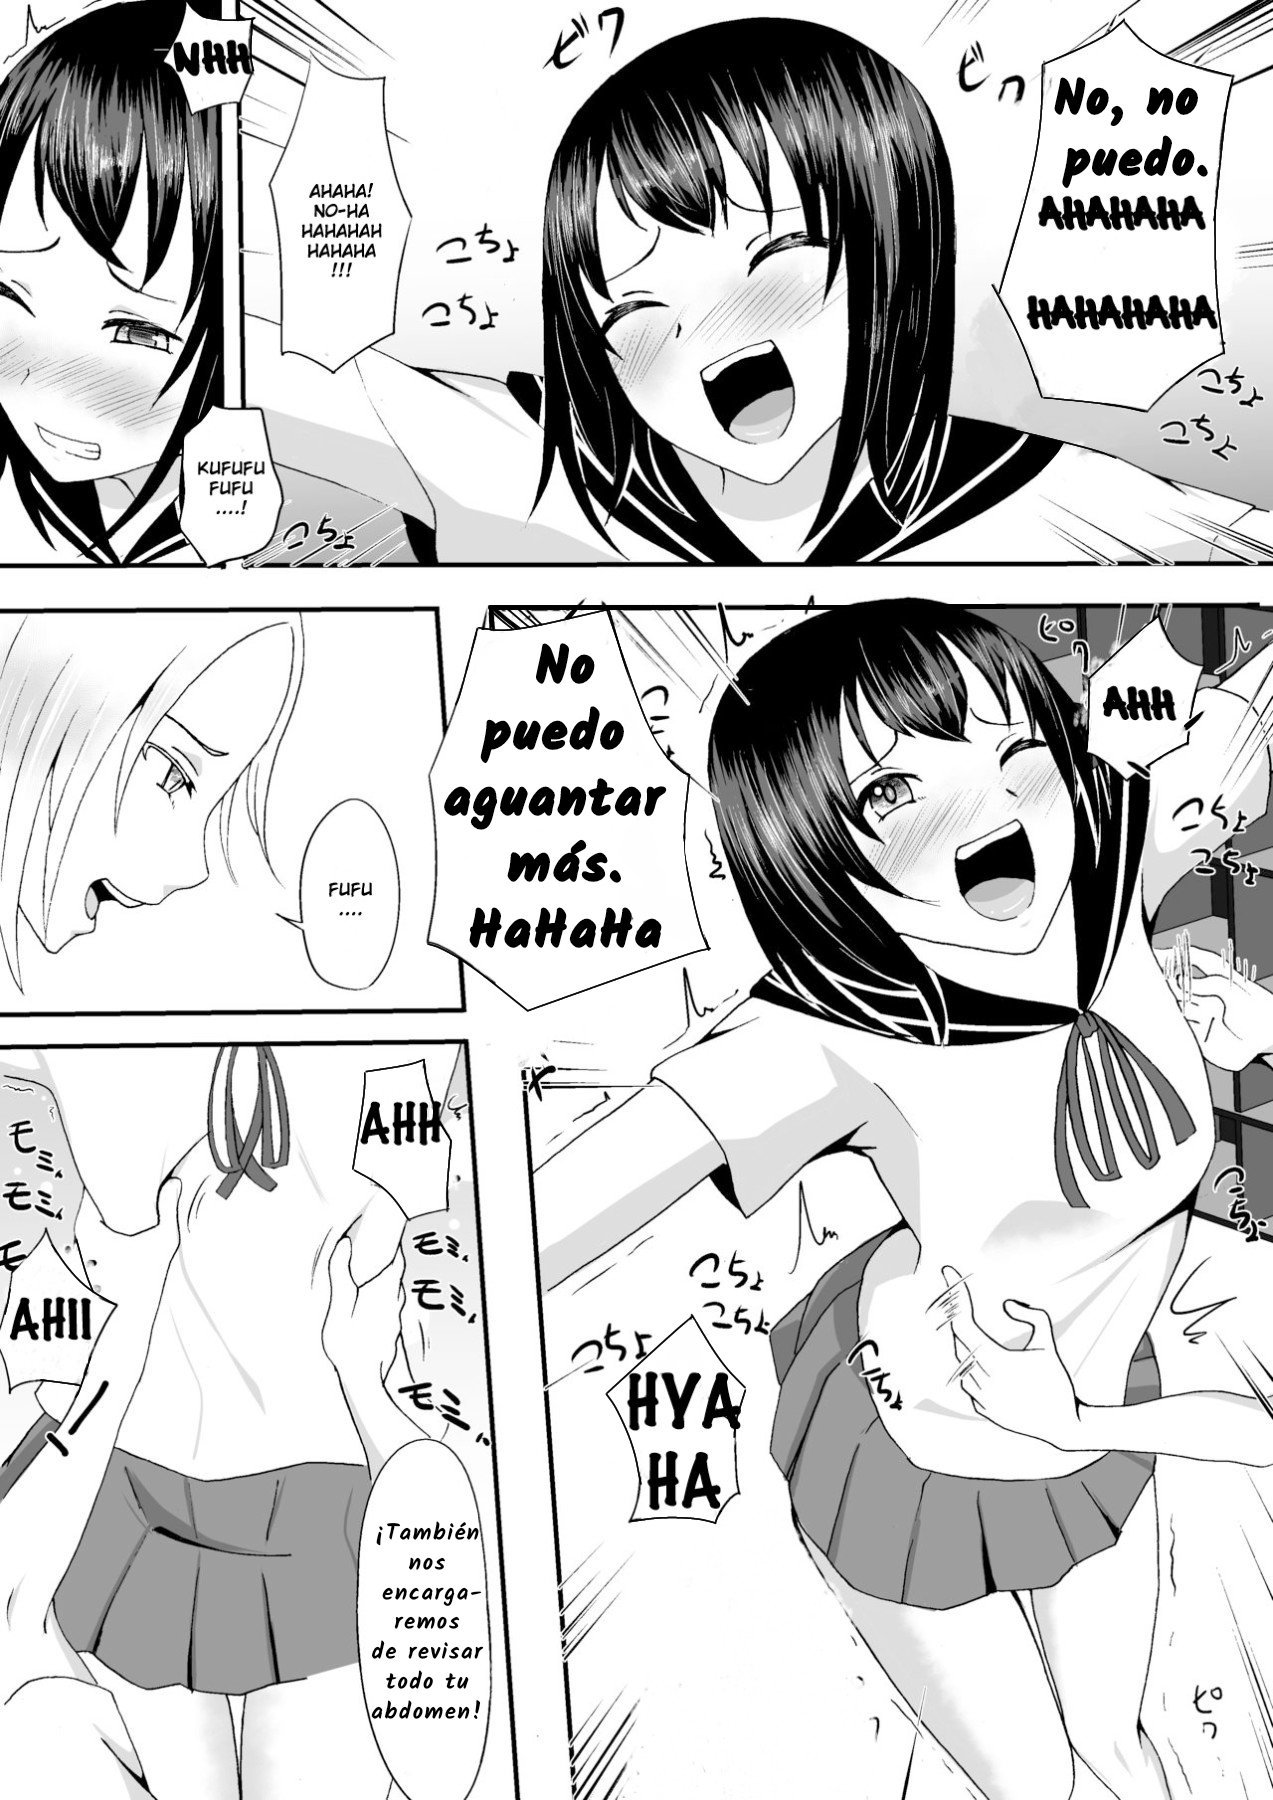 The Swimsuit Girs Ticklish Weapons - 8